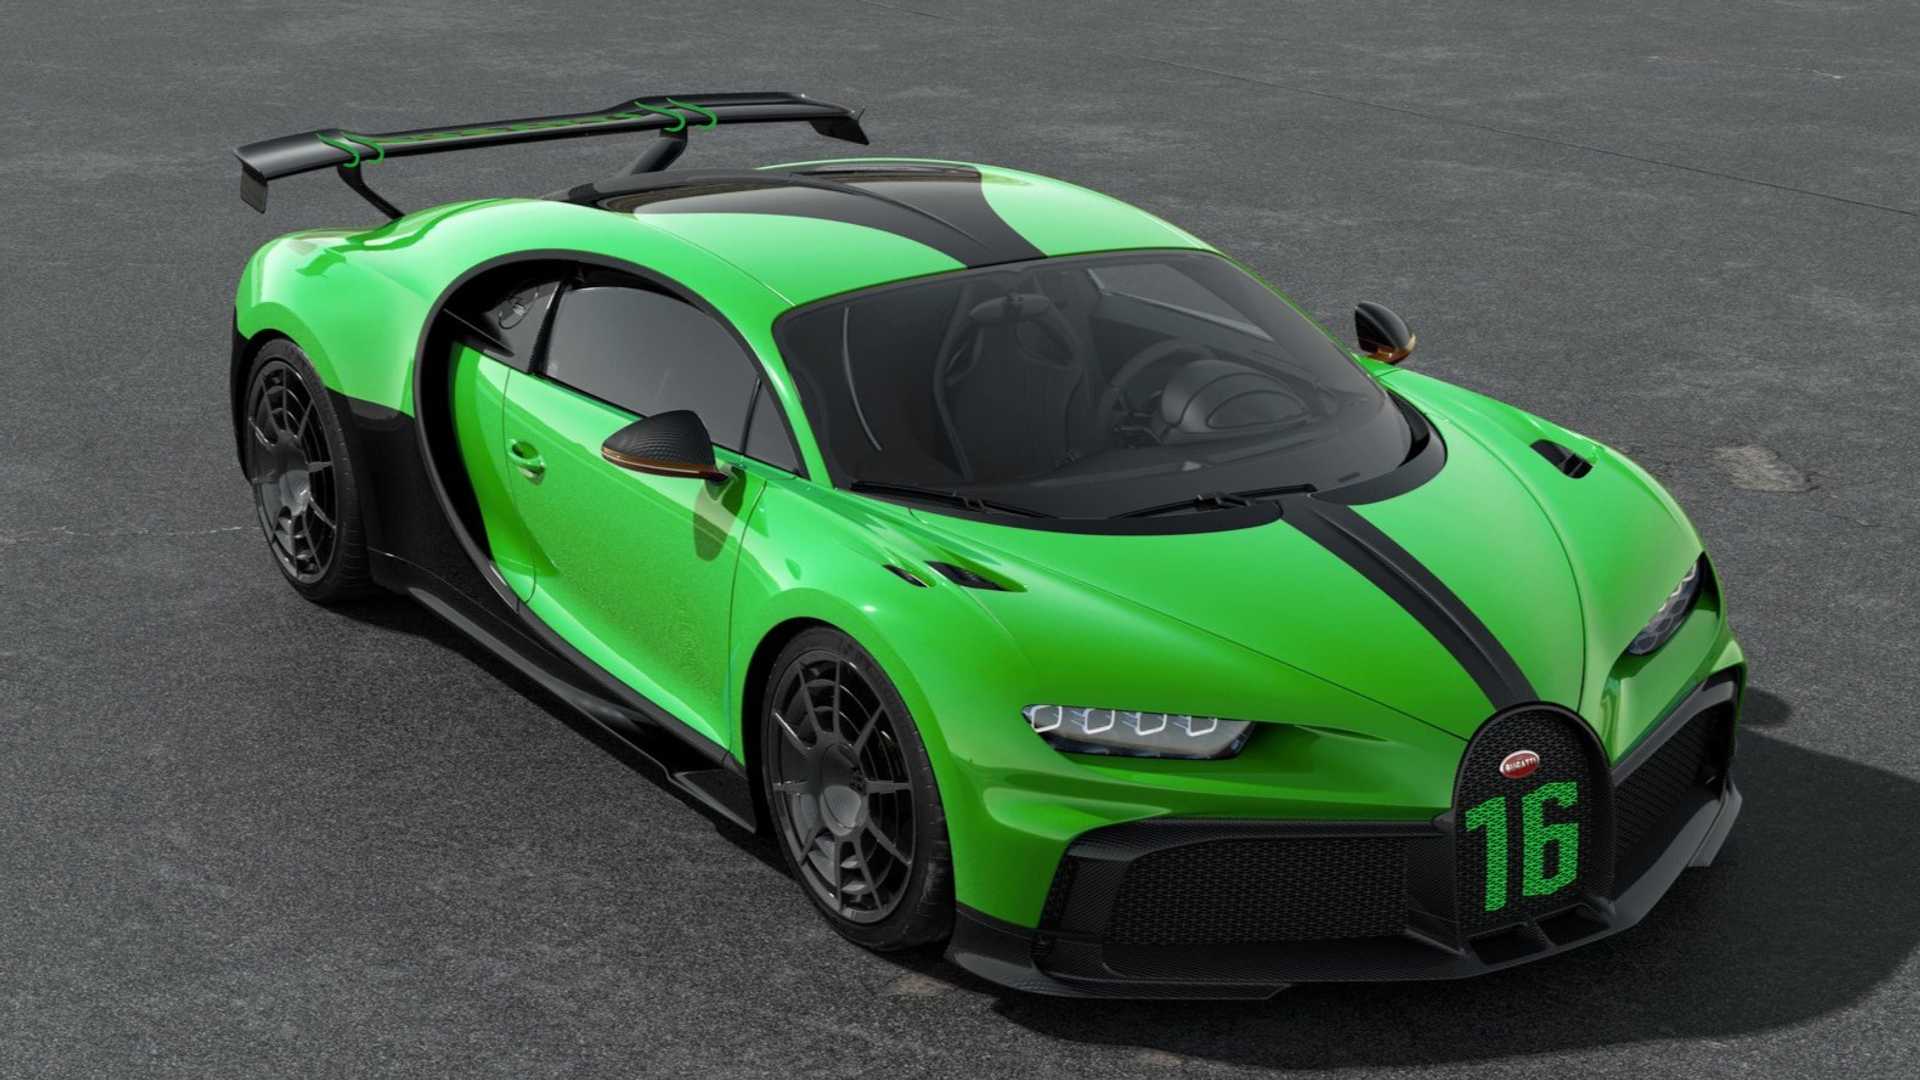 This Bugatti Chiron Pur Sport Makes Us Green With Envy 1920x1080